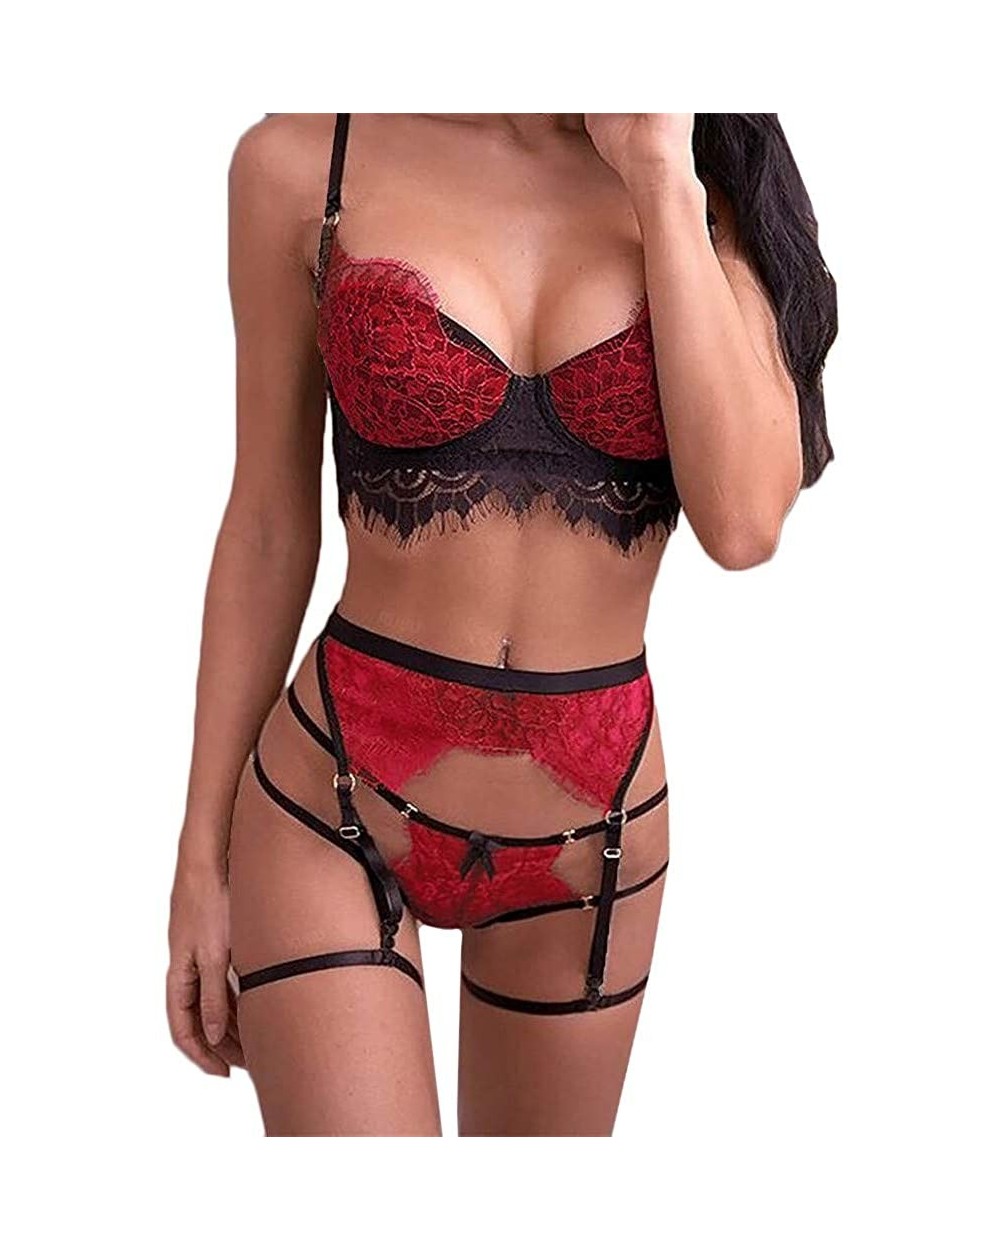 3Pcs Appeal Lingerie for Women Lace Sexy Lingerie Straps Bra and Panty Garter Set Underwear Babydoll - Red-a - CD1925DUNSE $1...